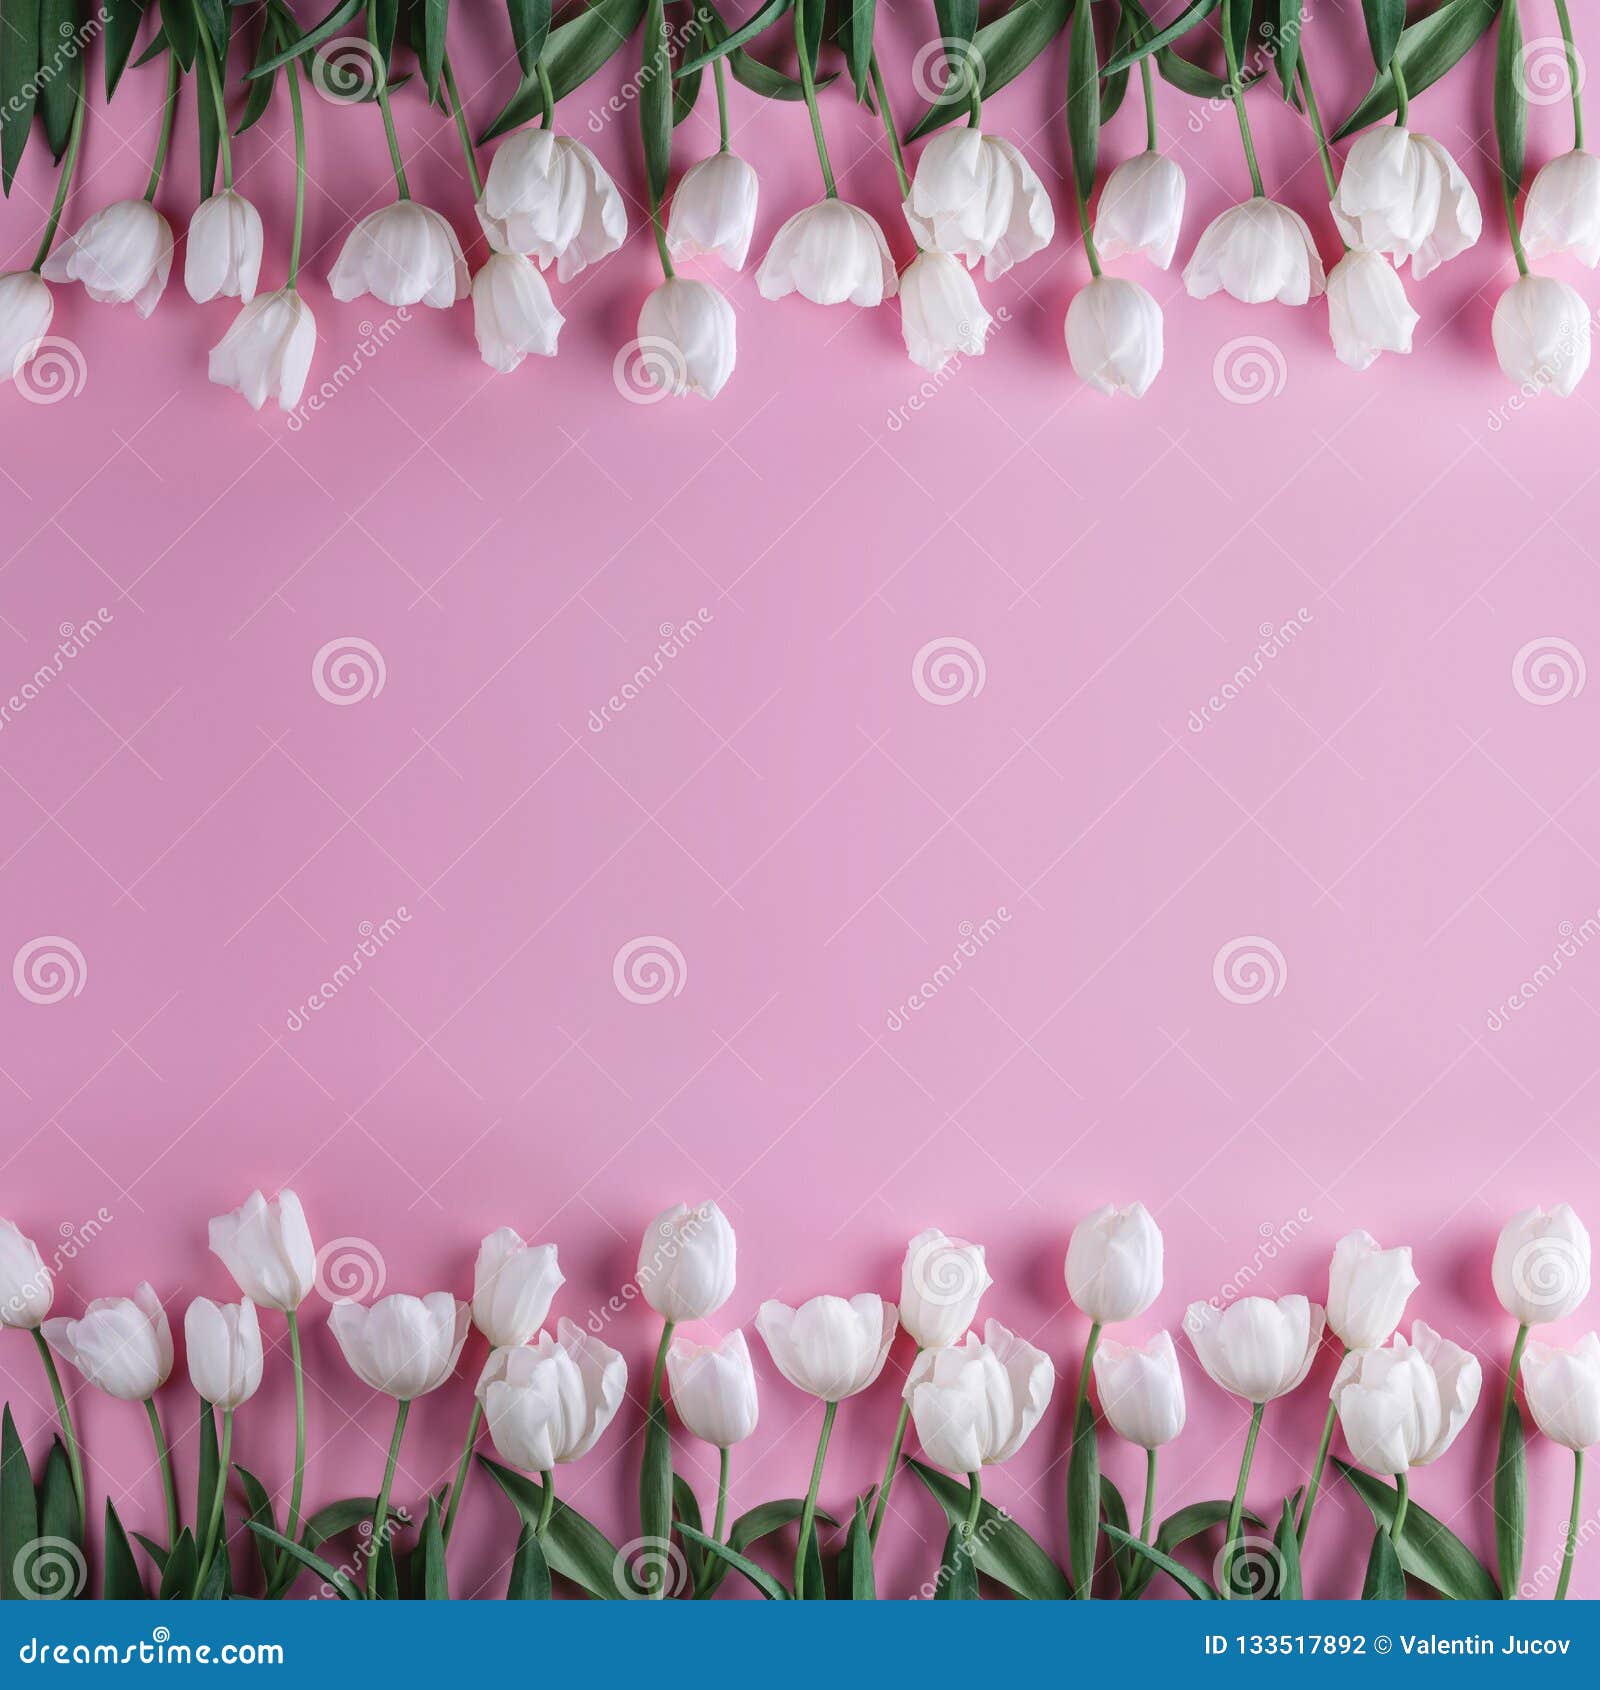 white tulips flowers over light pink background. greeting card or wedding invitation.